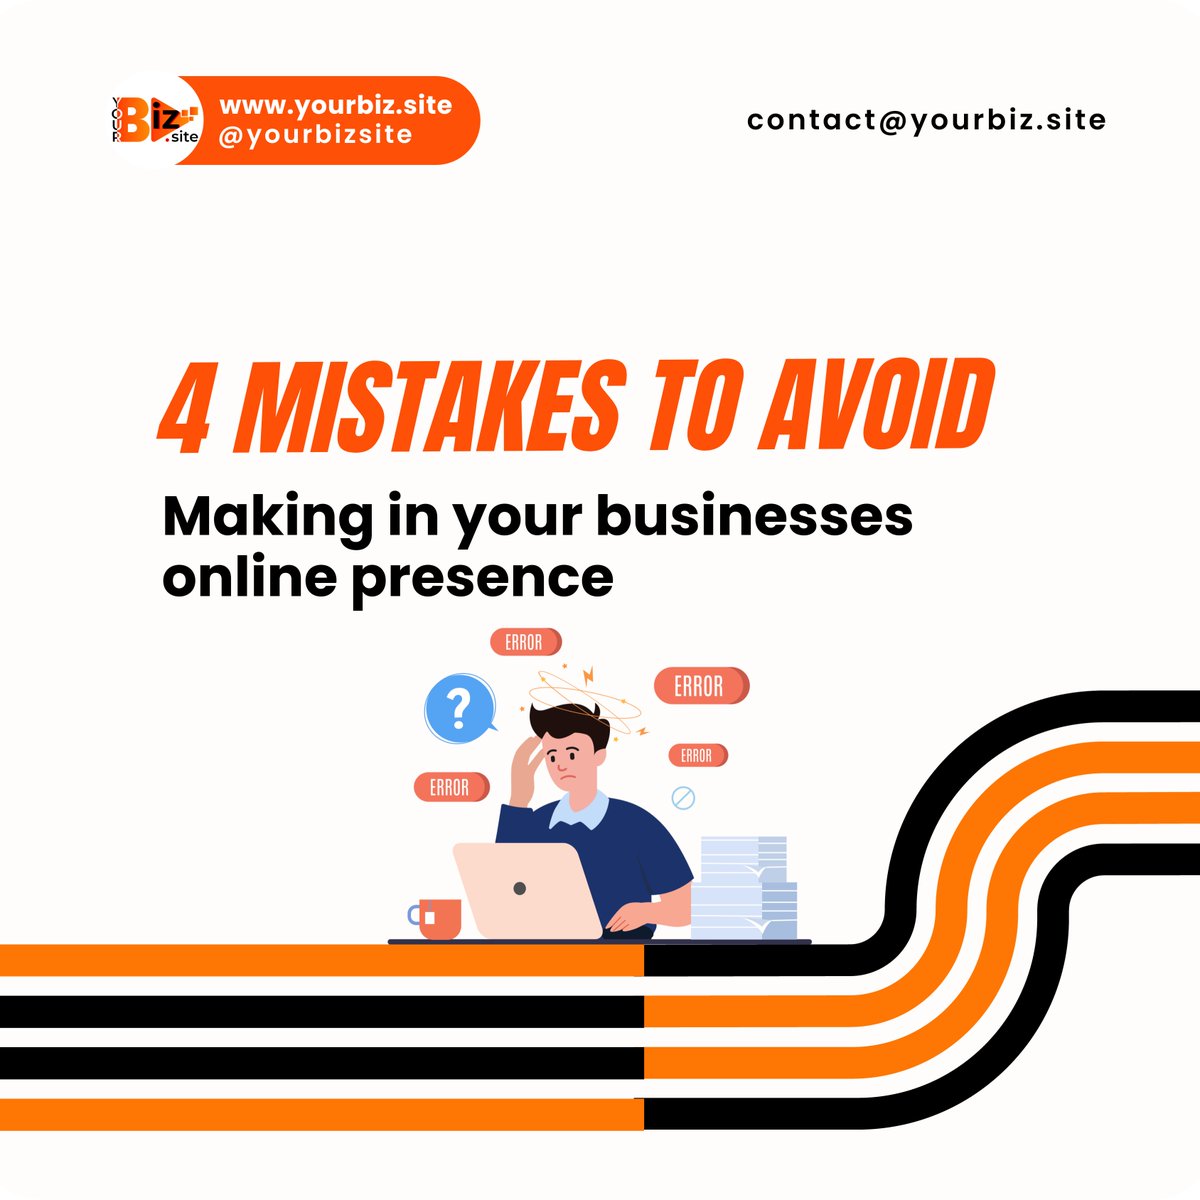 💻 Neglecting social media can hinder growth, so engage with your audience and build brand awareness. 
🤝 Don't ignore customer feedback - it's valuable for improving your products and services. 

#OnlineBusiness #AvoidMistakes #GrowWithConfidence #SocialMediaPresence